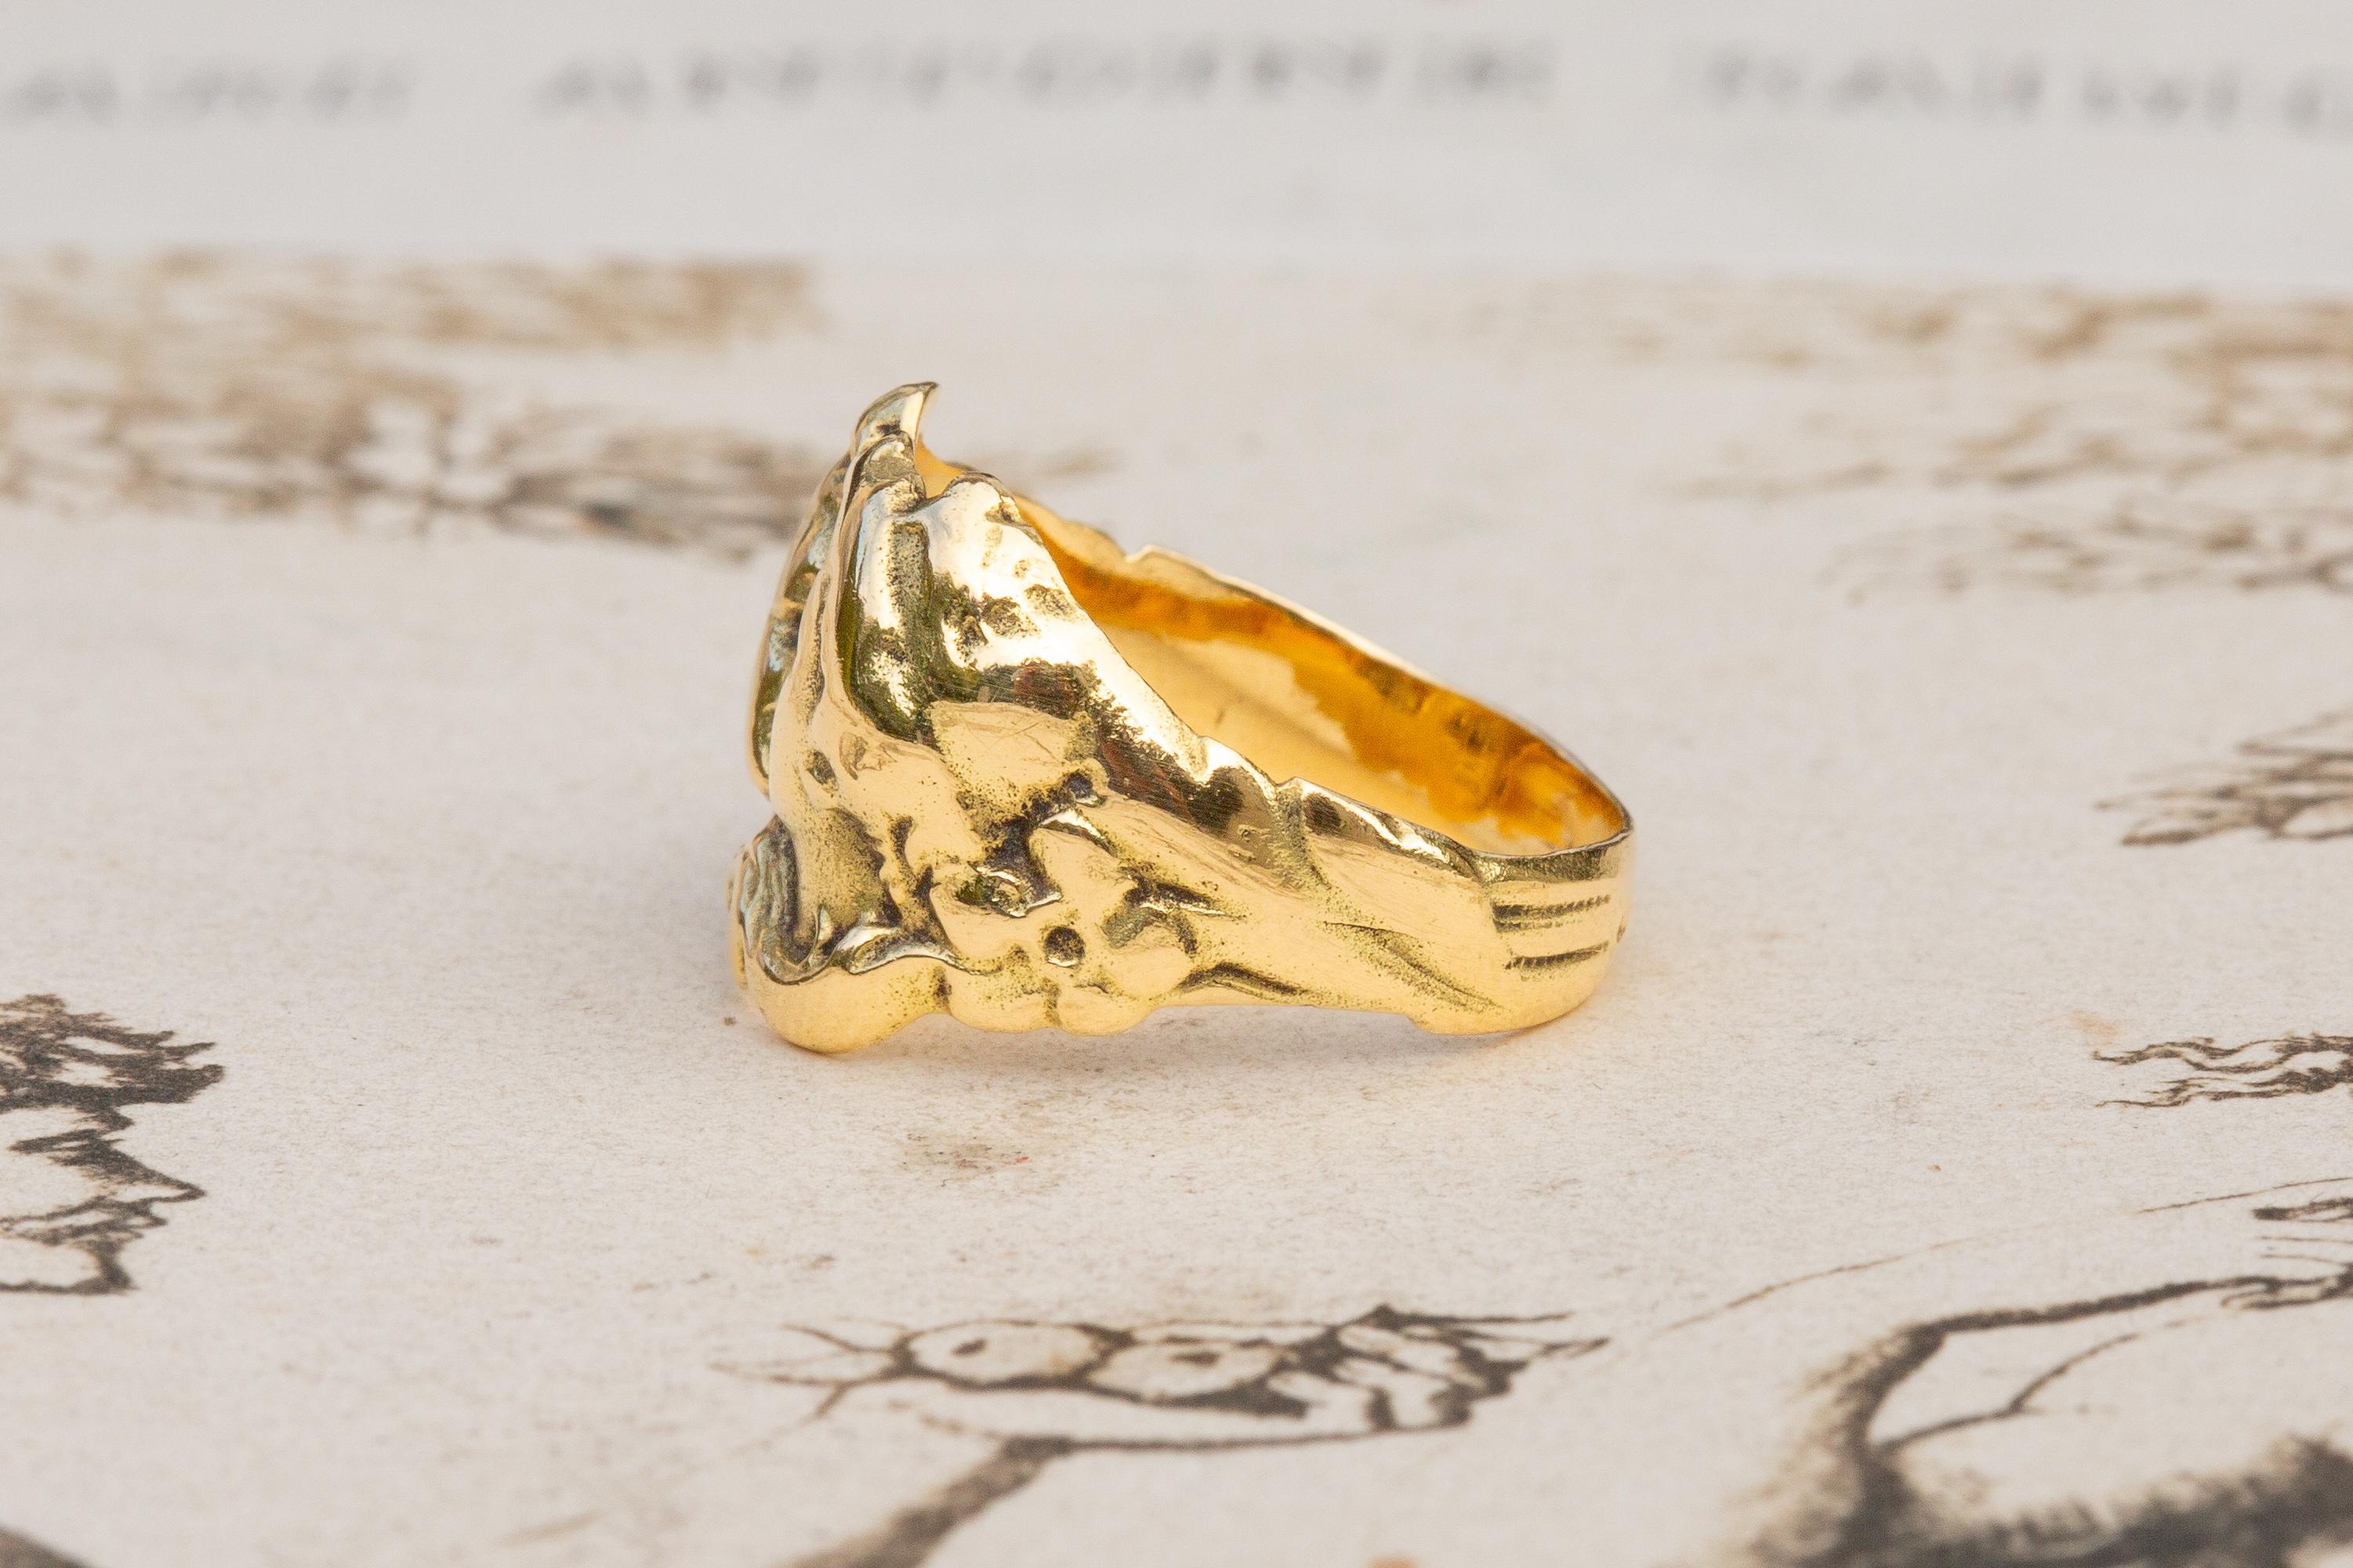  French Antique Art Nouveau 18K Gold Ethereal Figural Kissing Ring c.1910 2